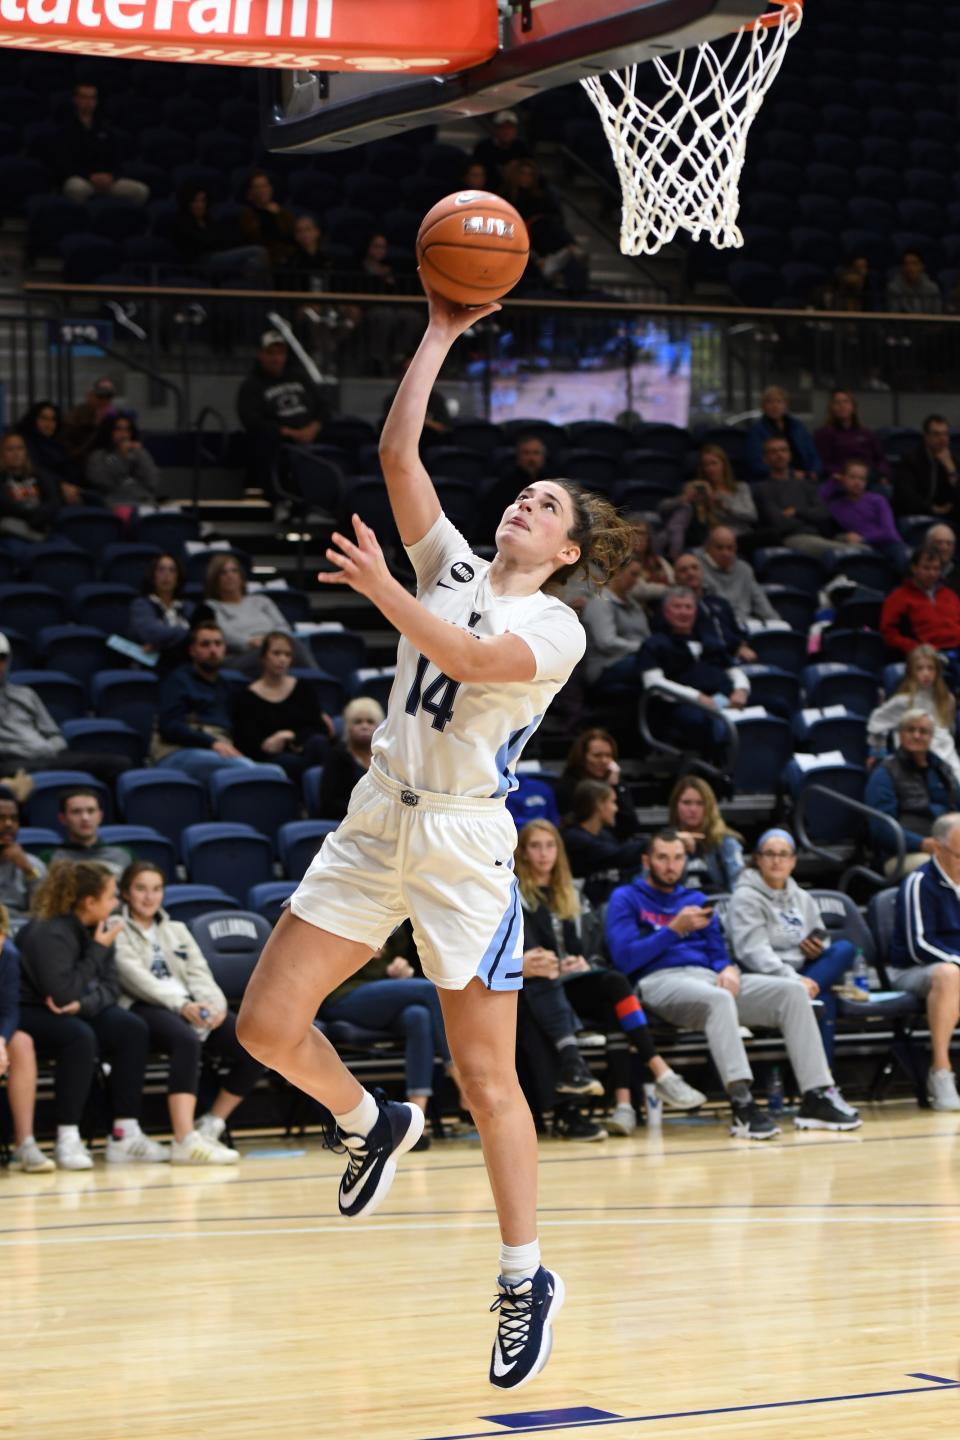 Brianna Herlihy goes up for a layup for the Villanova women's basketball team.